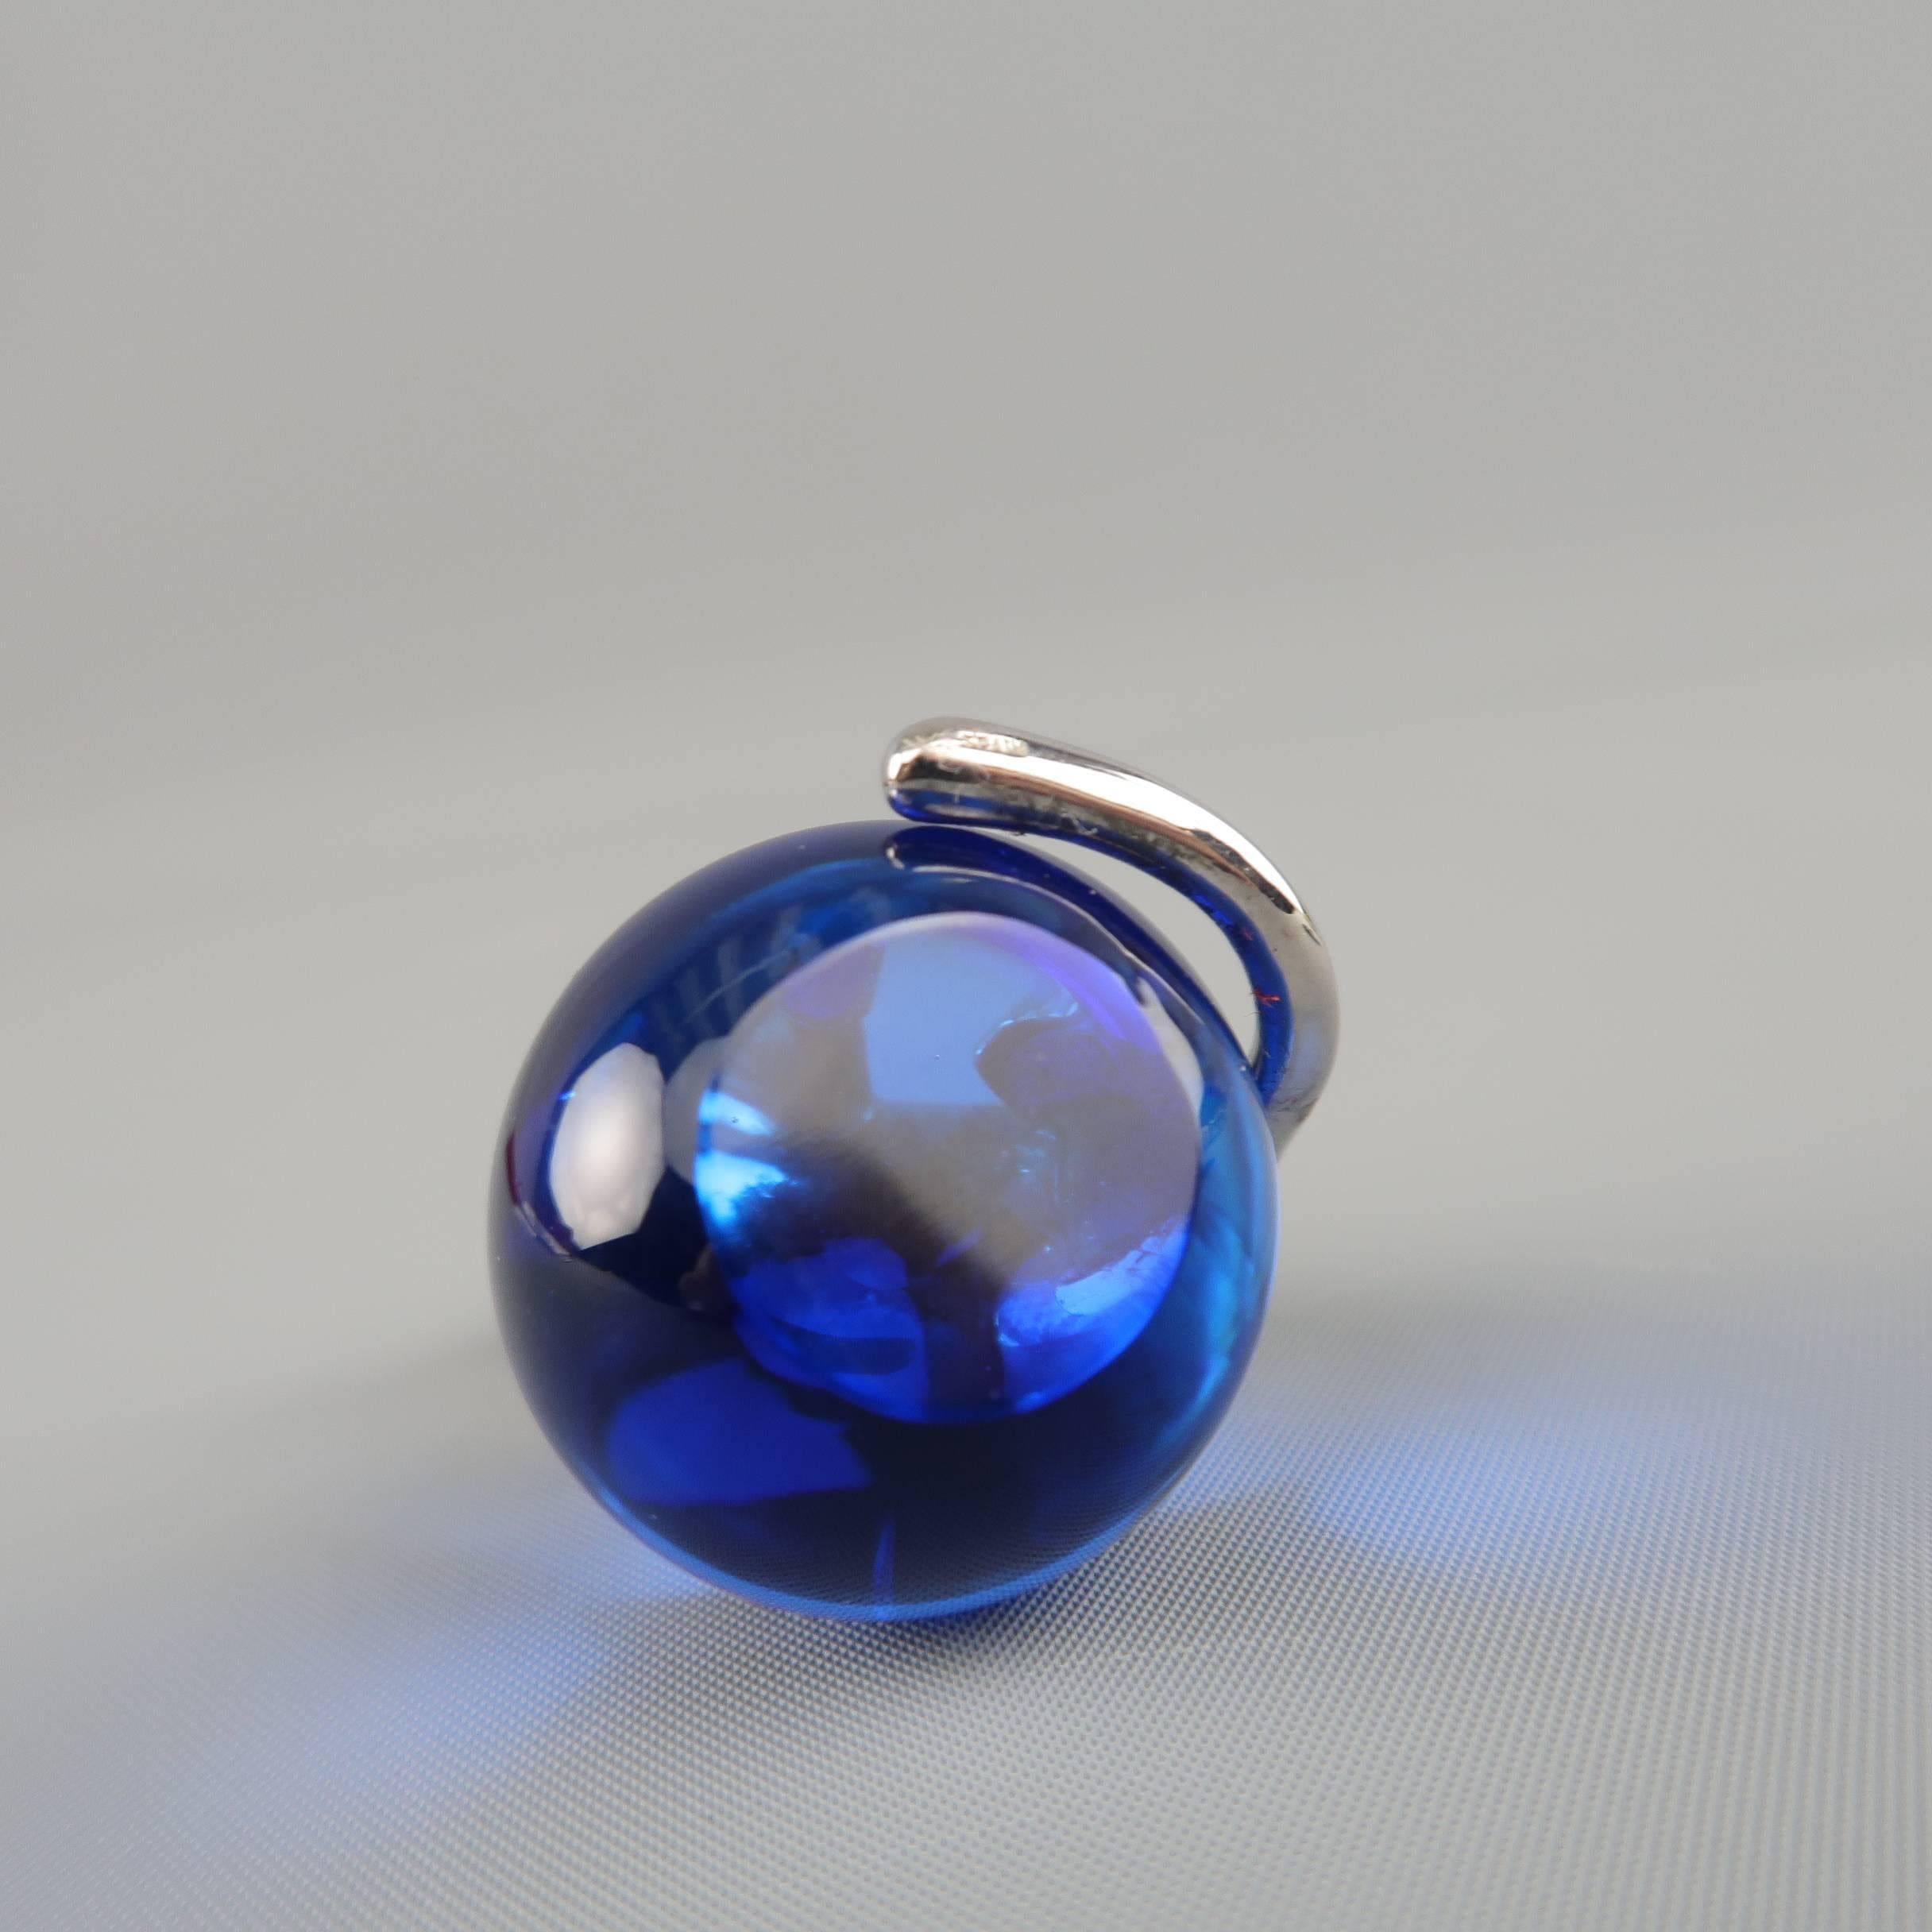 CARTIER mini paperweight features a polished sterling panther on a royal blue glass crystal ball. Includes original suede dust bag and Certificat. Made in Spain.
 
Good Pre-Owned Condition.
Marked: 925 SPAIN
 
Height: 2.25 in.
Width: 1.45 in.

SKU: